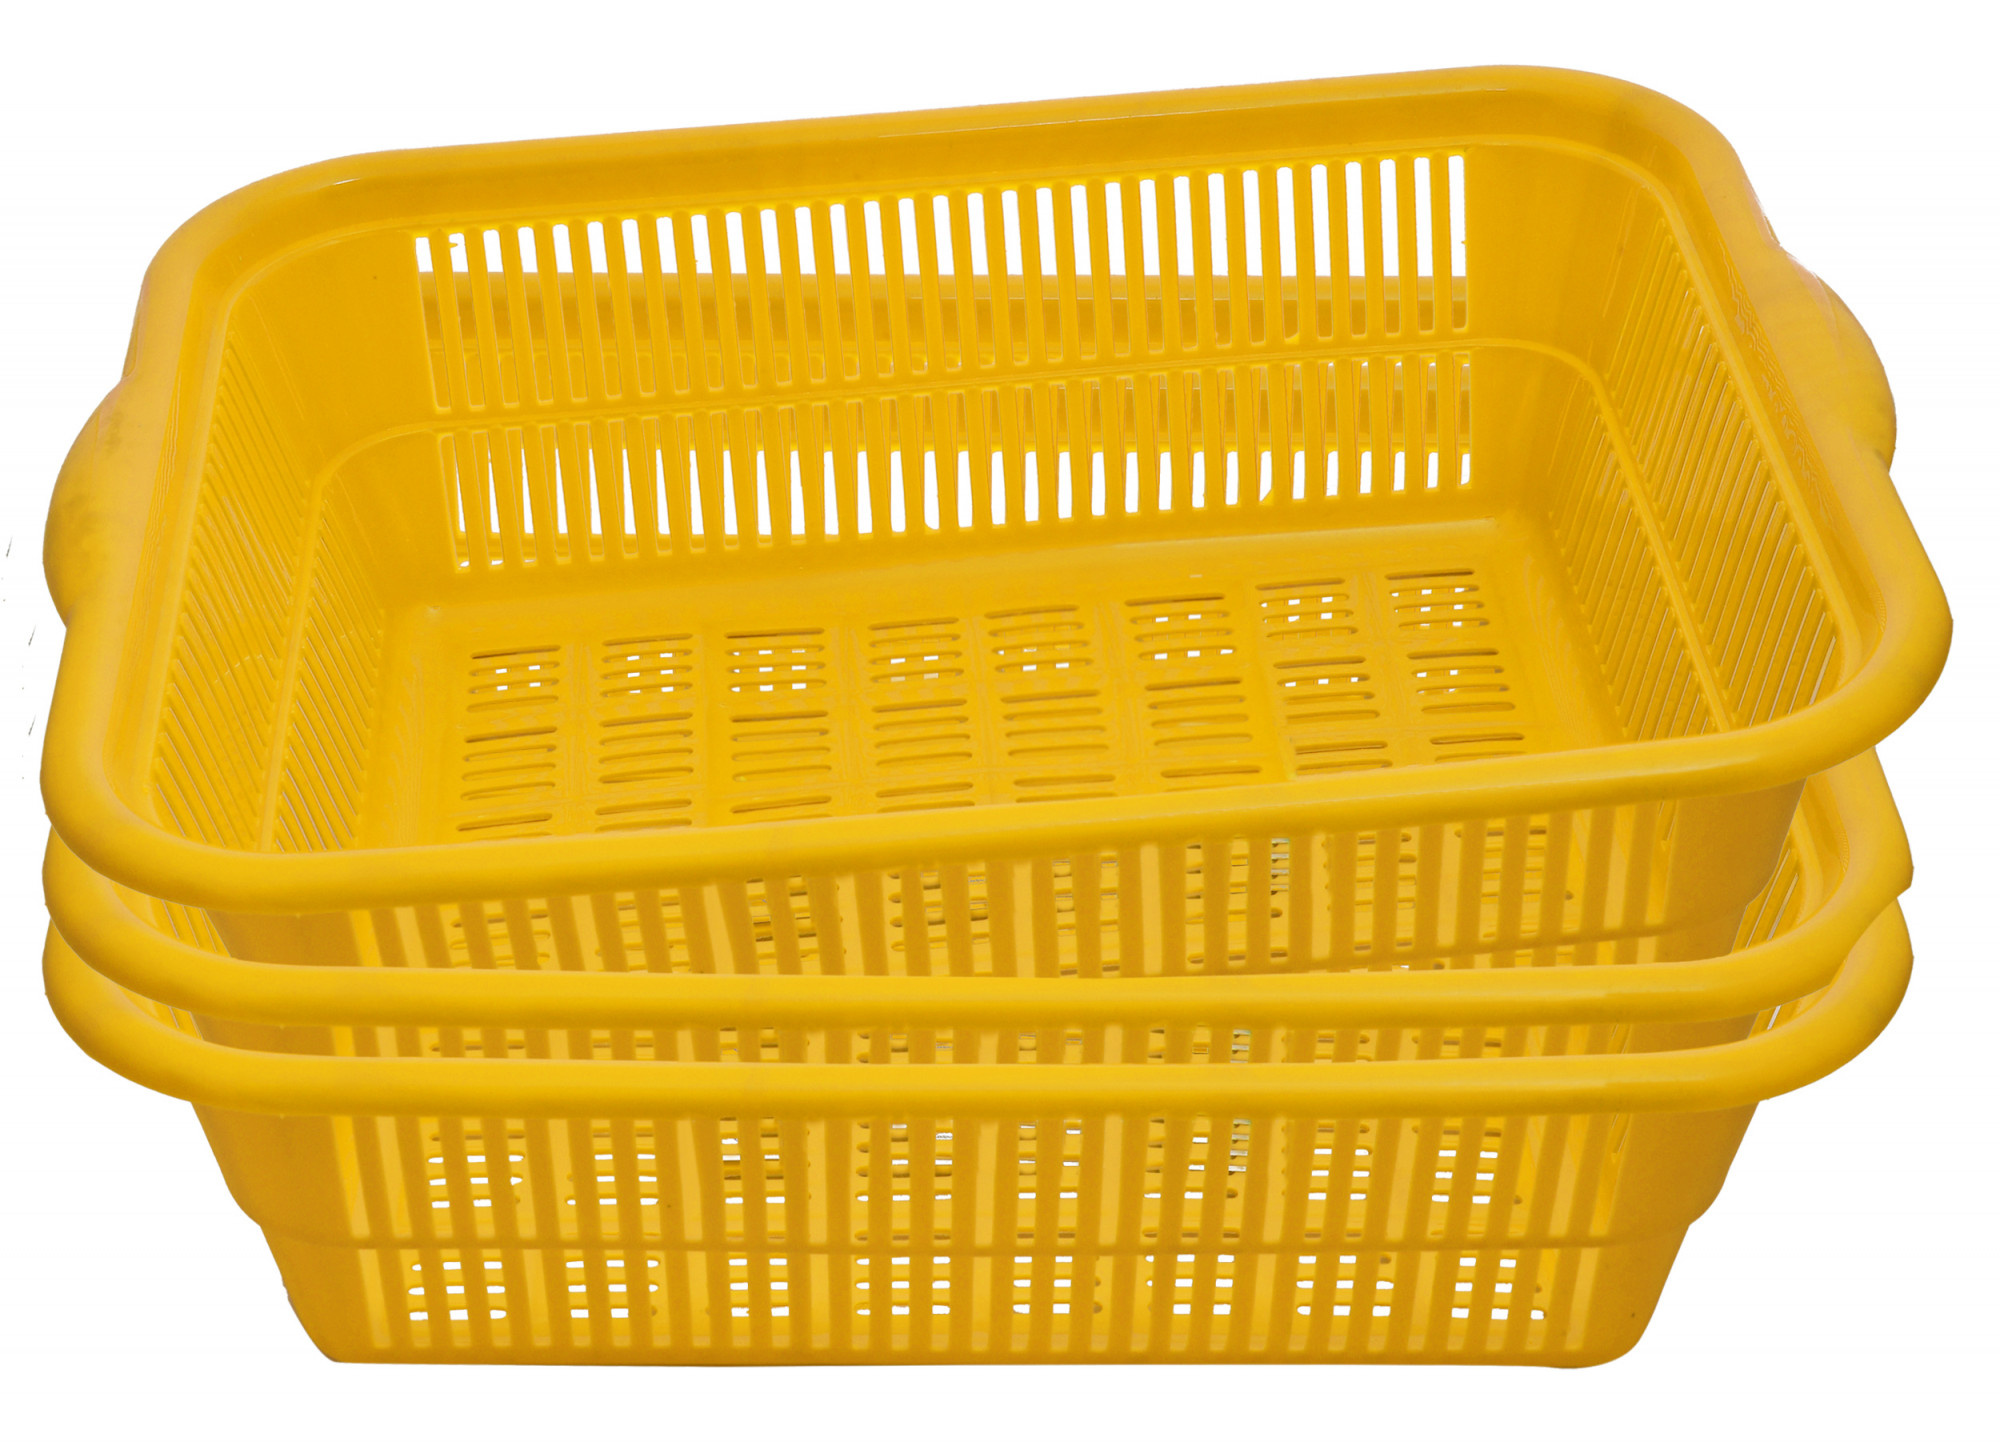 Kuber Industries 3 Pieces Plastic Kitchen Dish Rack Drainer Vegetables And Fruits Basket Dish Rack Multipurpose Organizers ,Small Size,Yellow